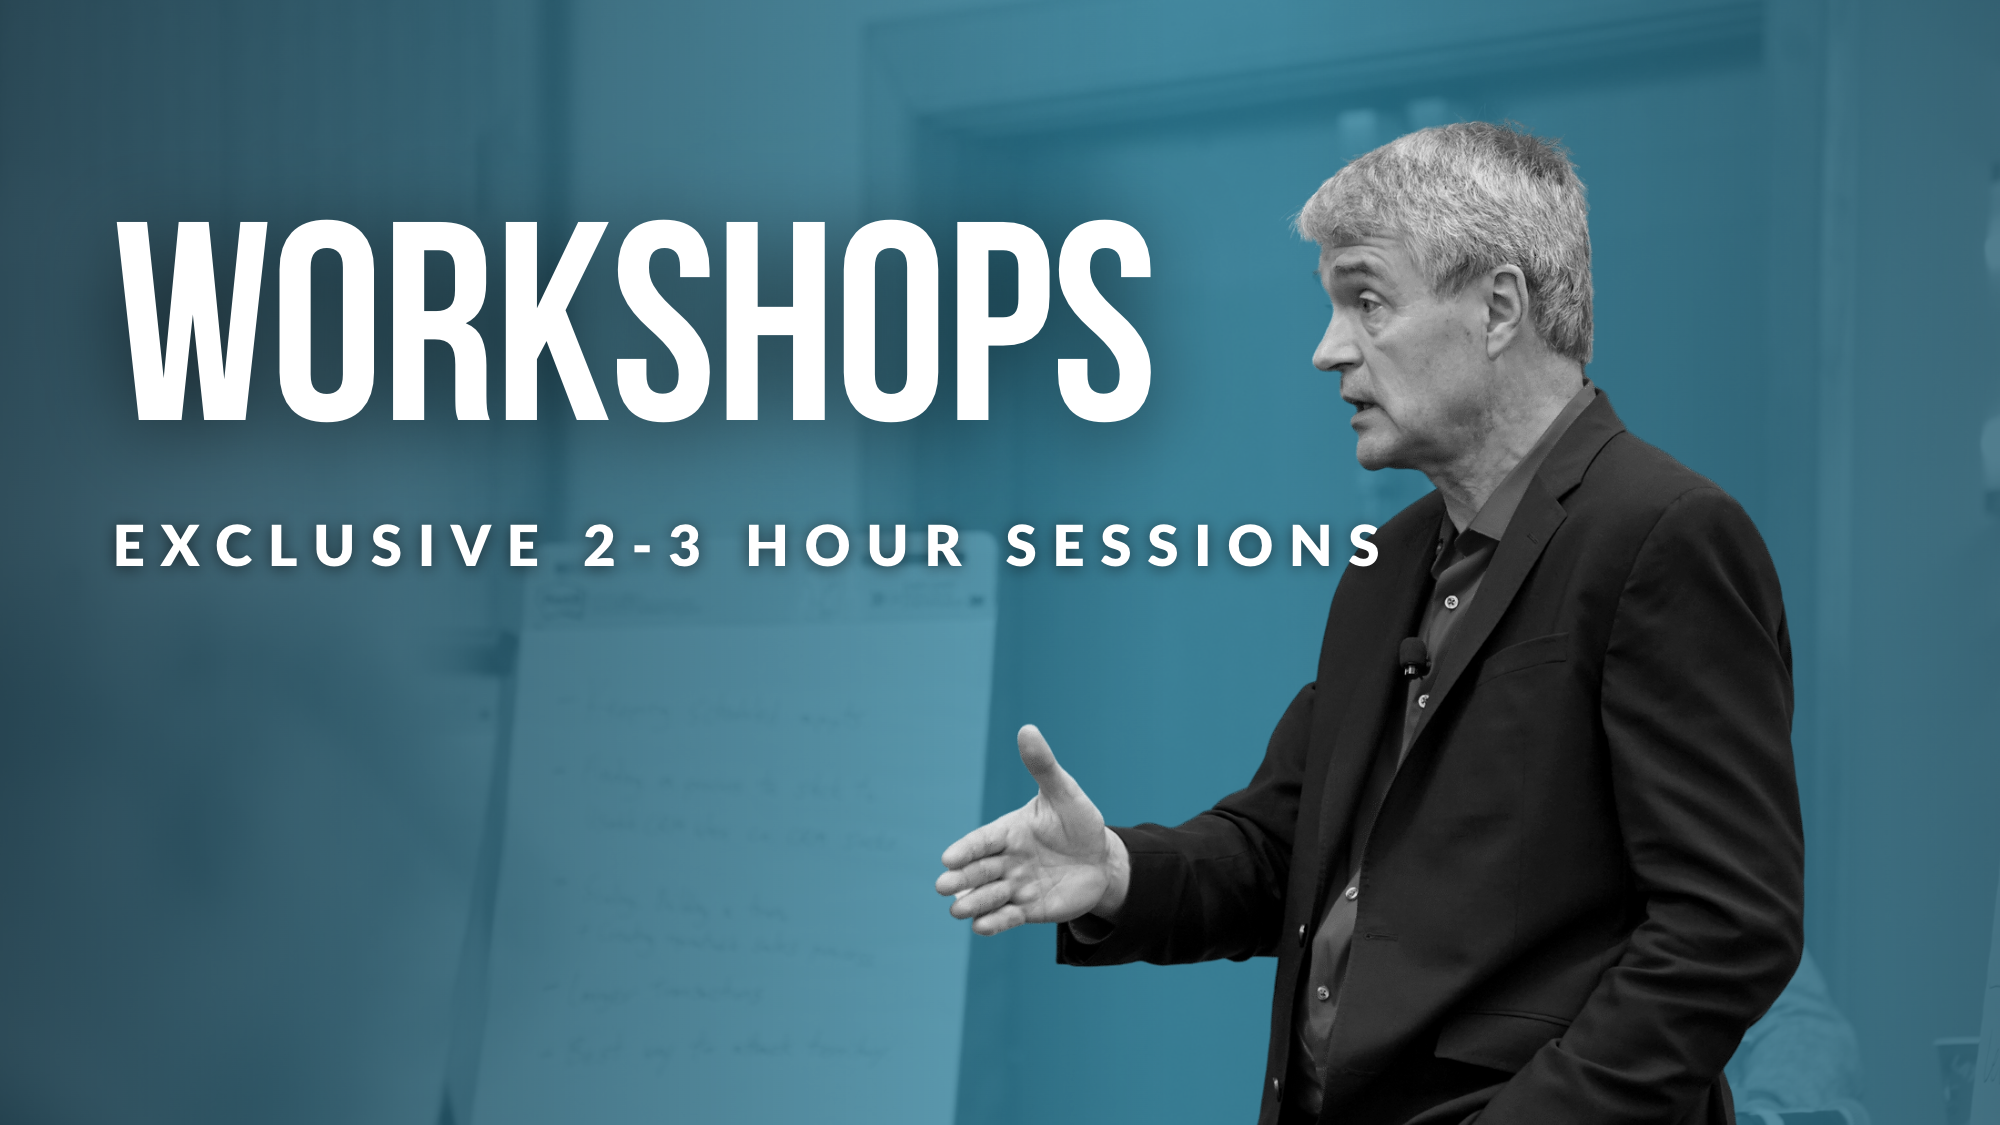 Workshops: Exclusive 2-3 Hour Sessions